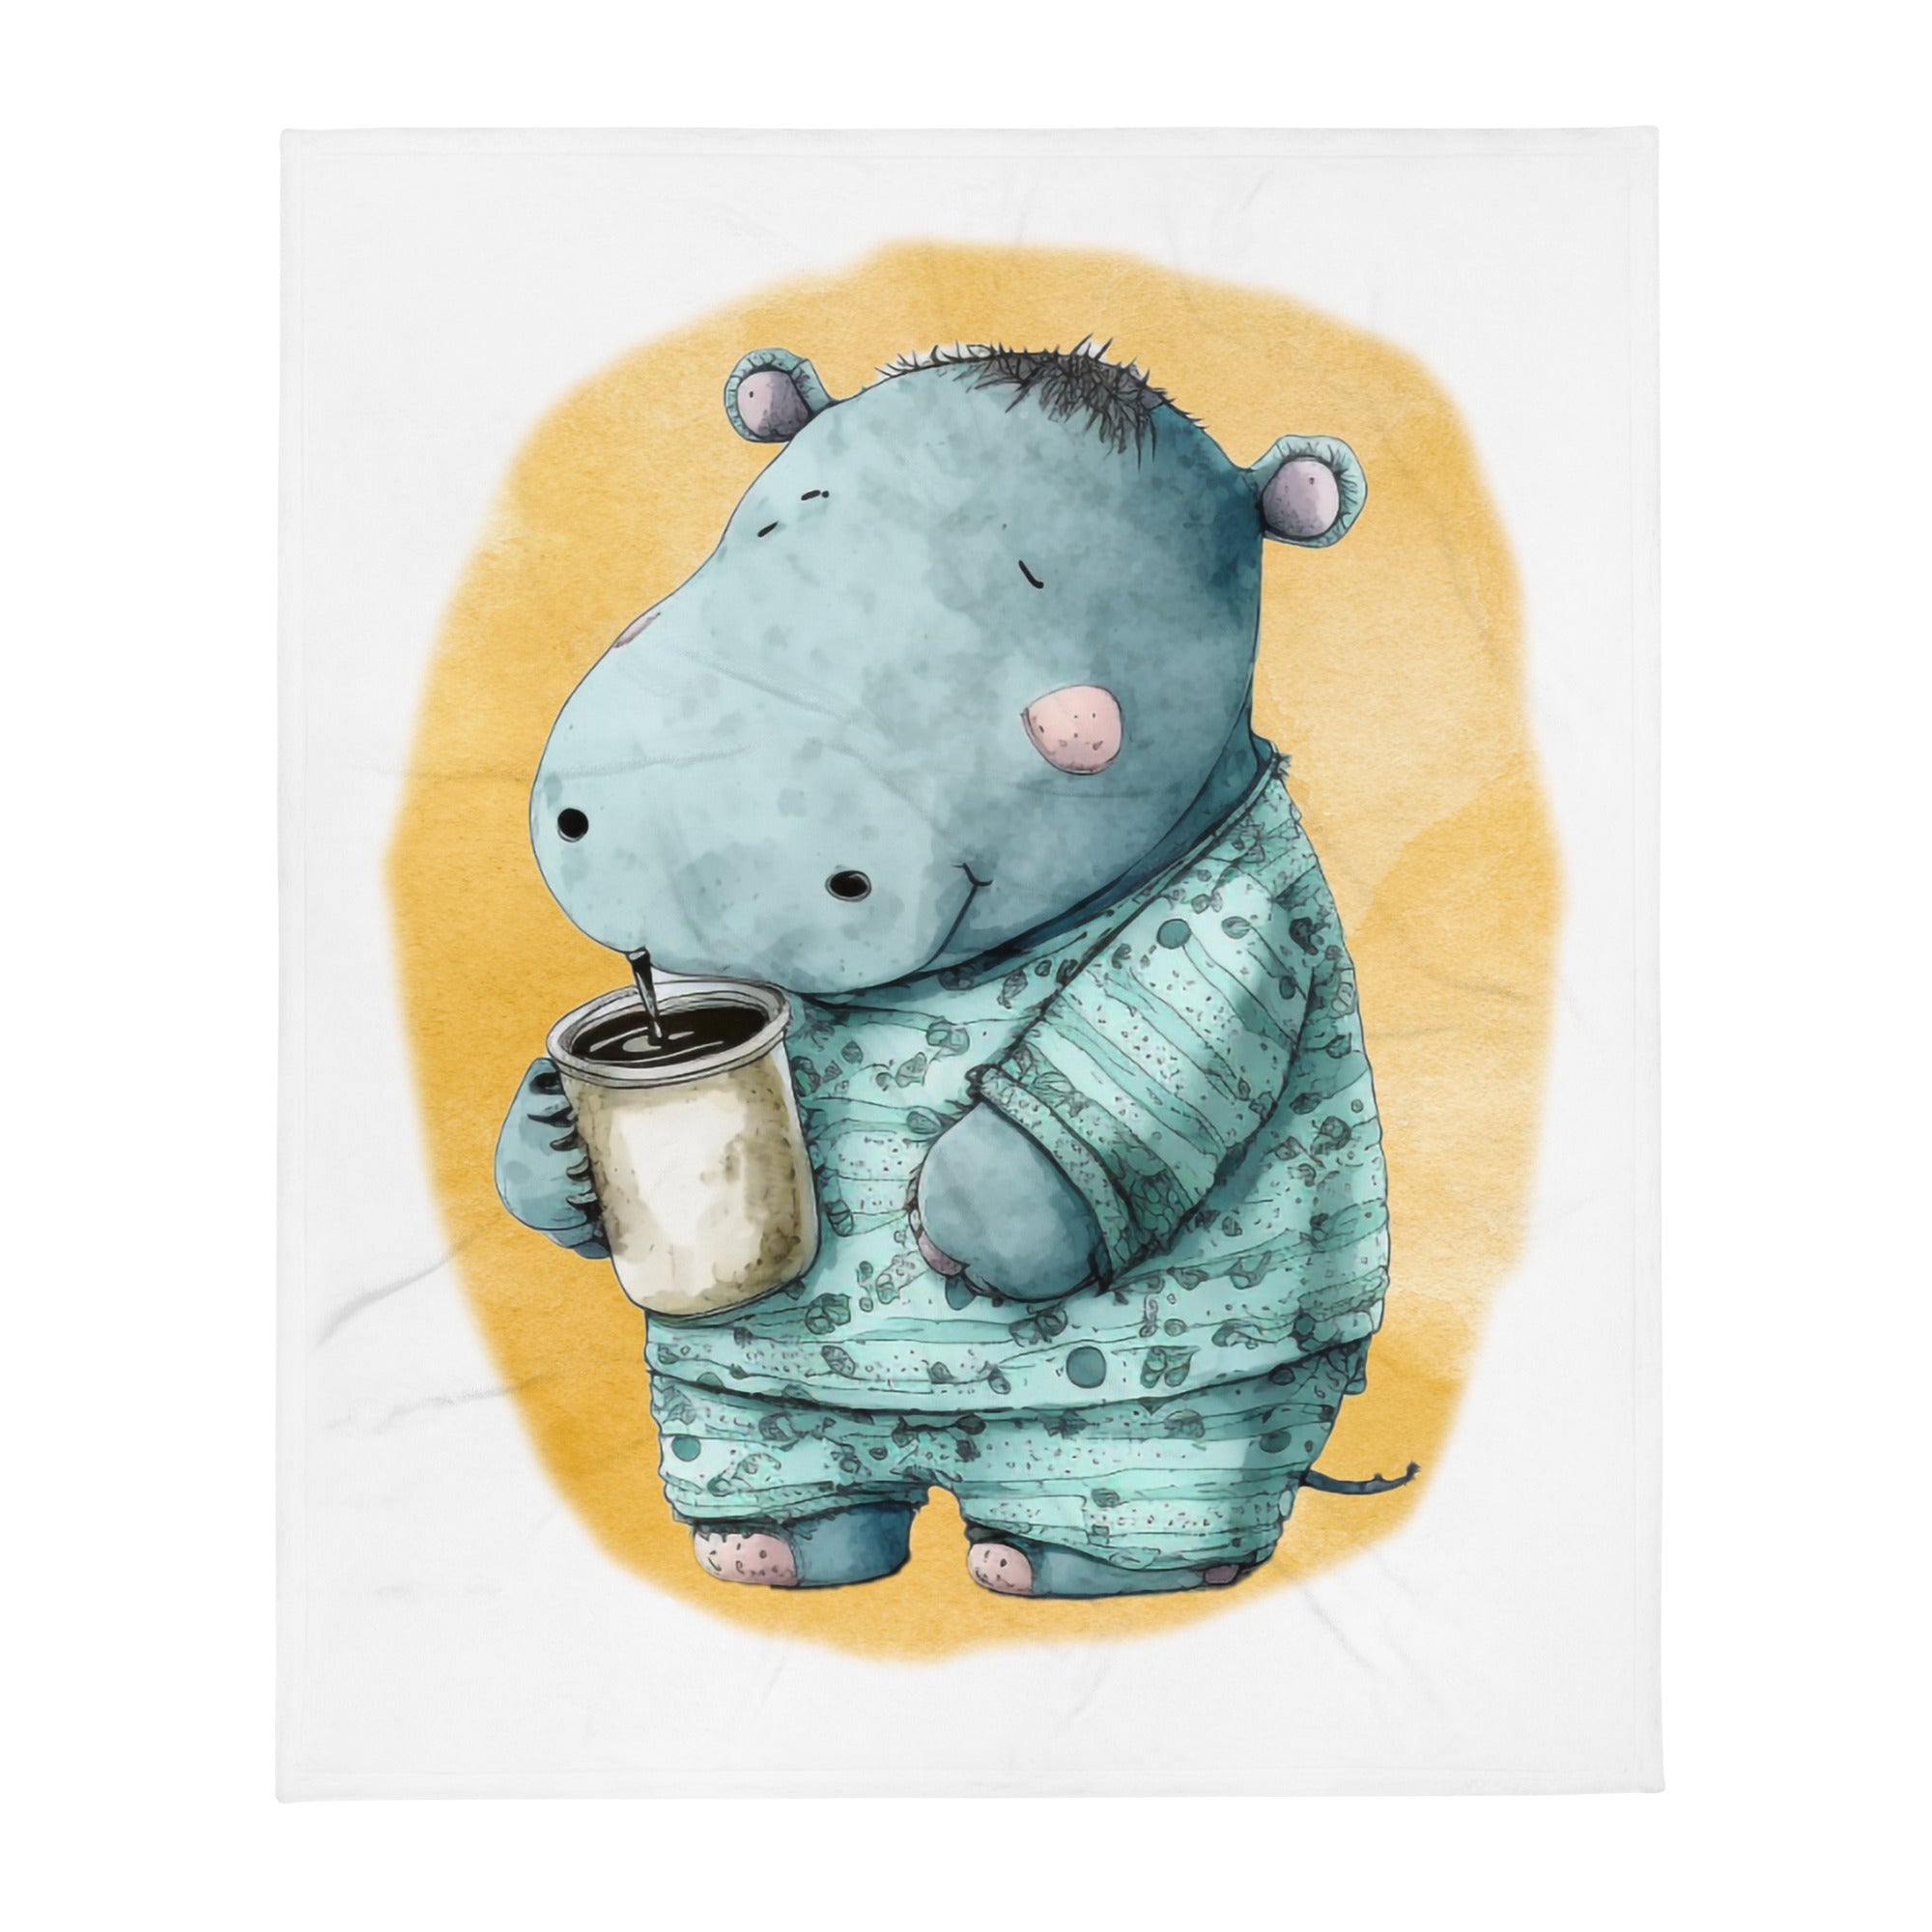 Sleepy Hippo 100% Polyester Soft Silk Touch Fabric Throw Blanket - Cozy, Durable and Adorable